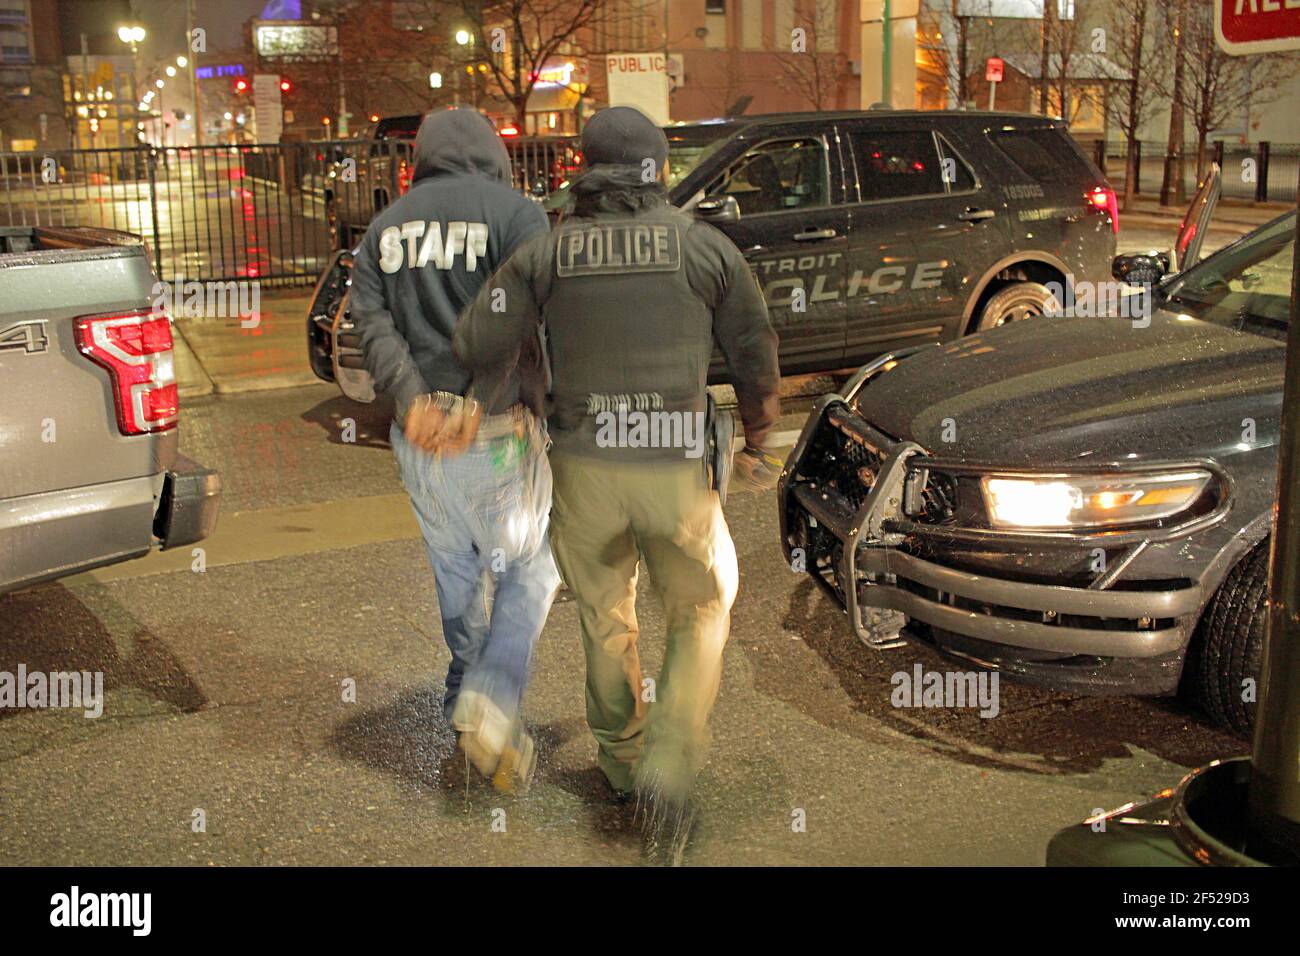 A Detroit police officer leads an arrested man away in handcuffs, Detroit, Michigan, USA Stock Photo